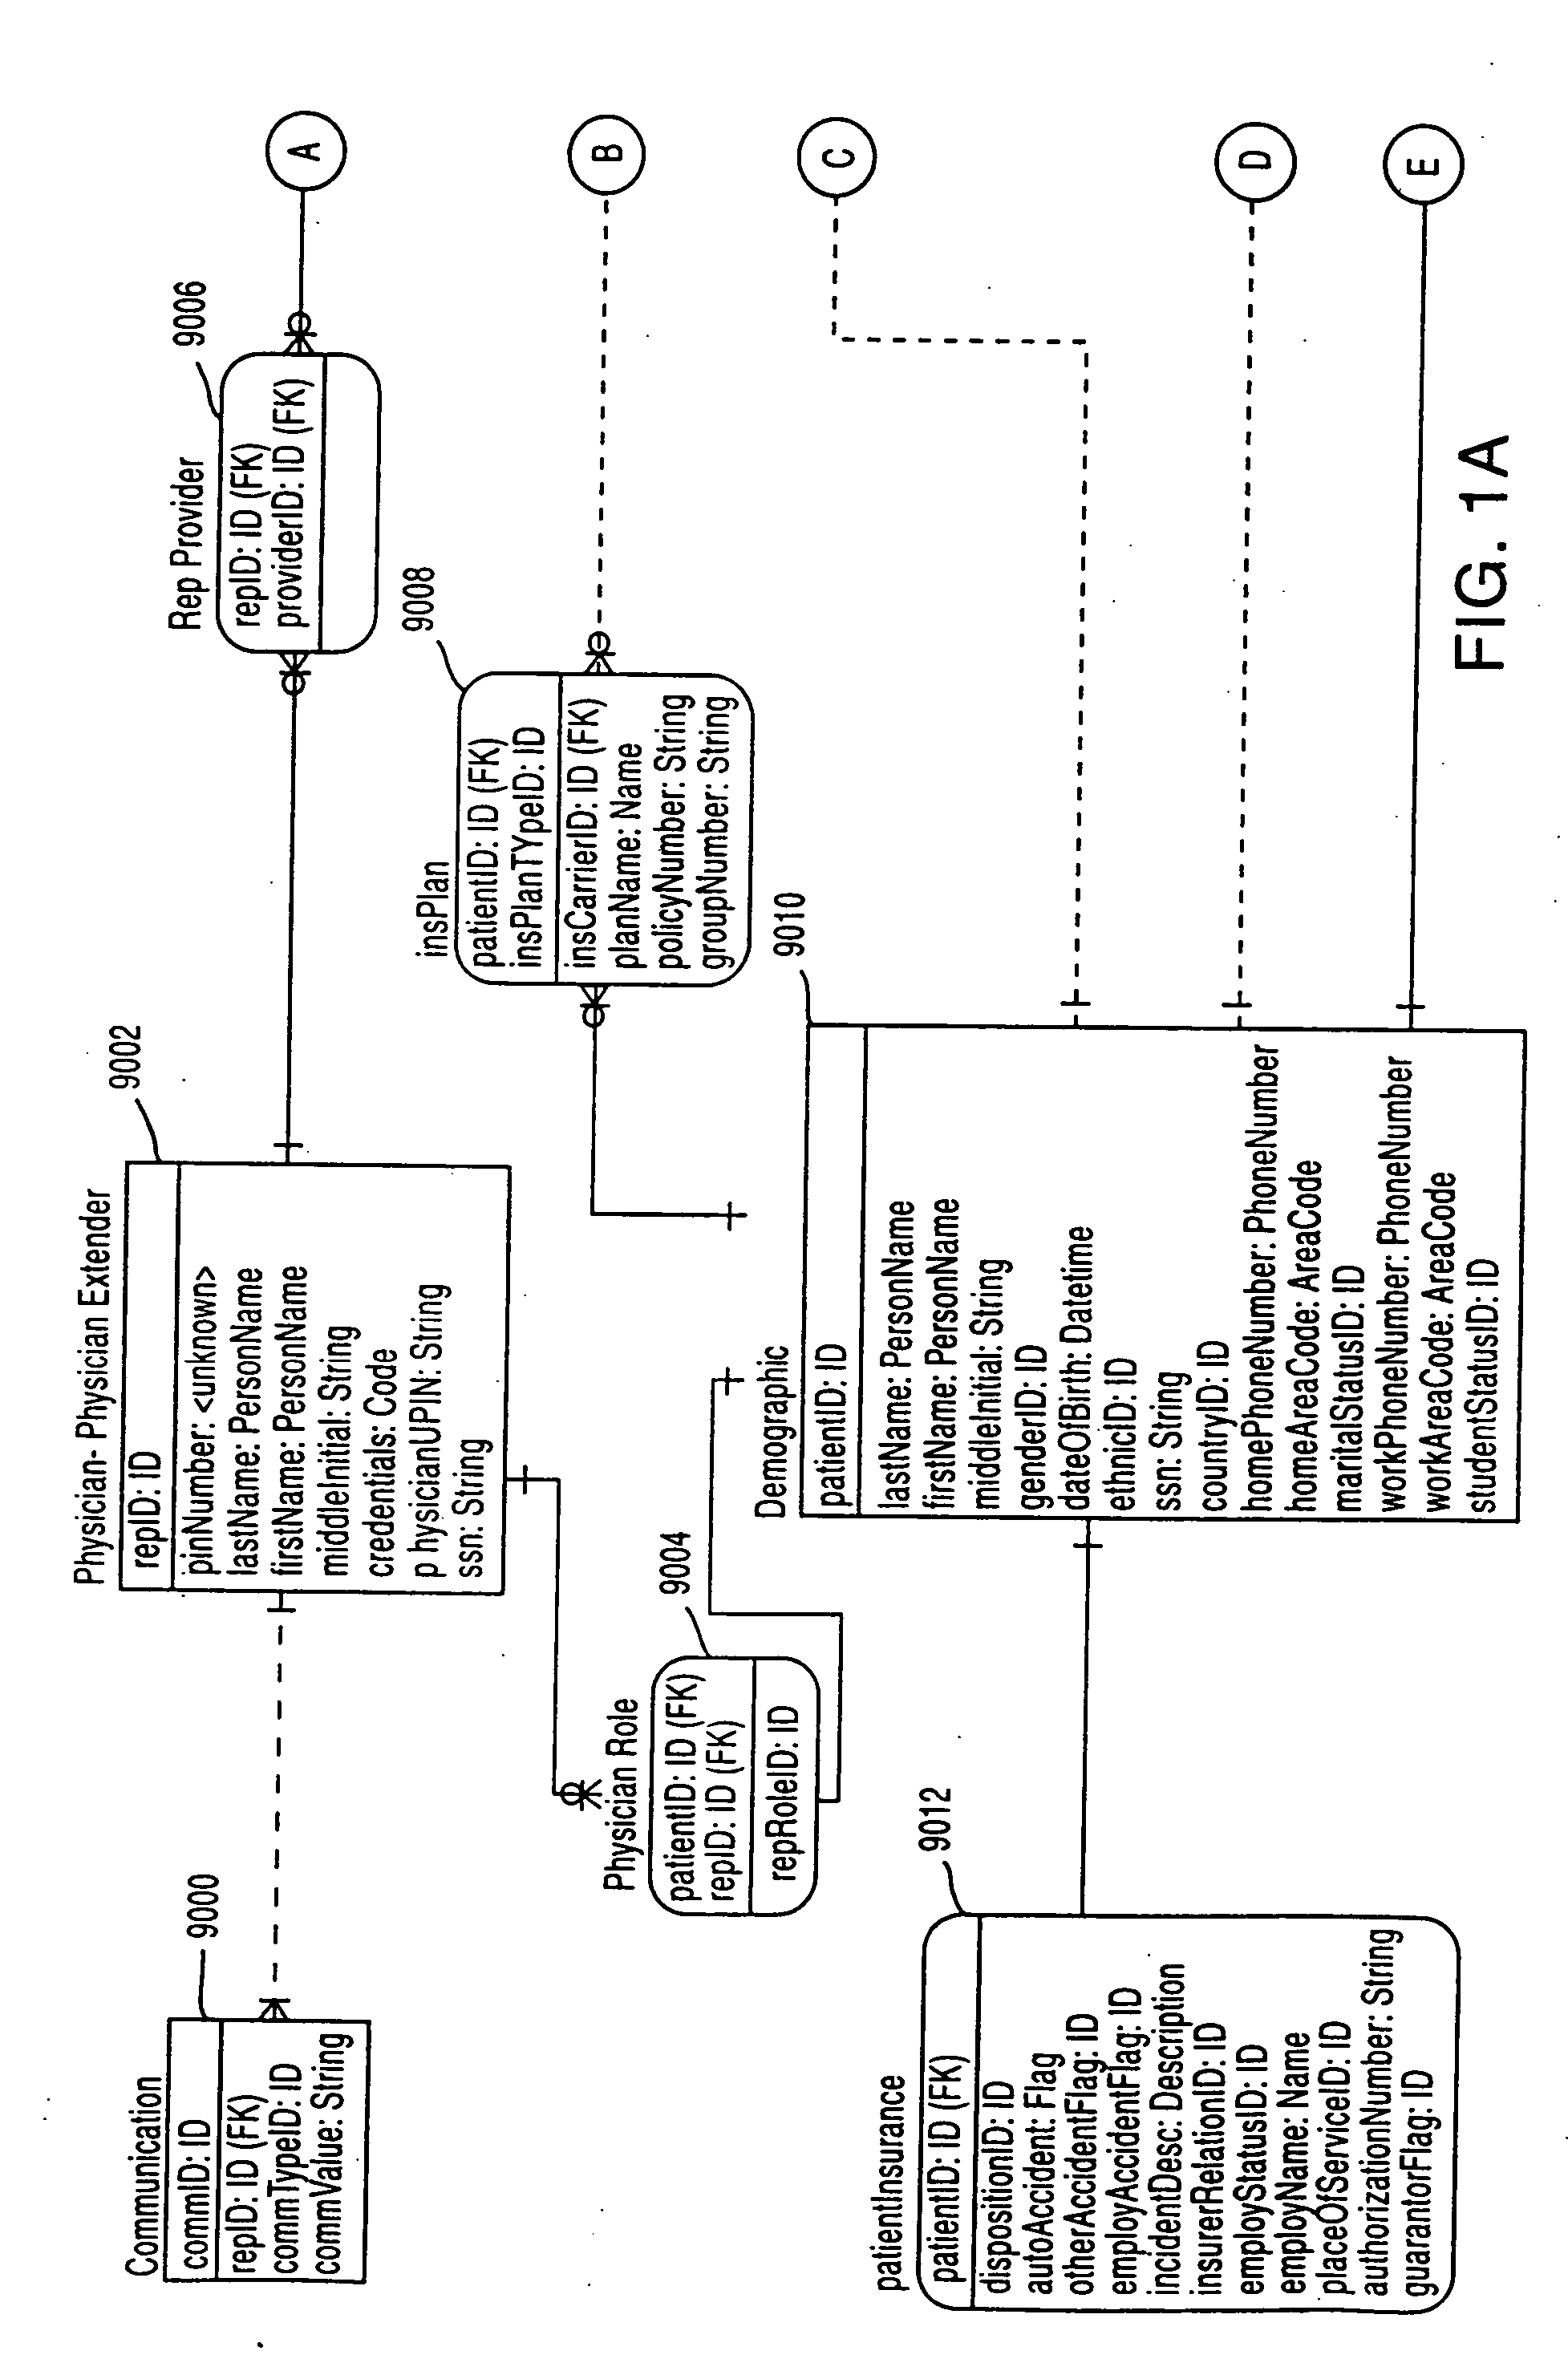 System and method for providing continuous, expert network care services from a remote location(s) to geographically dispersed healthcare locations